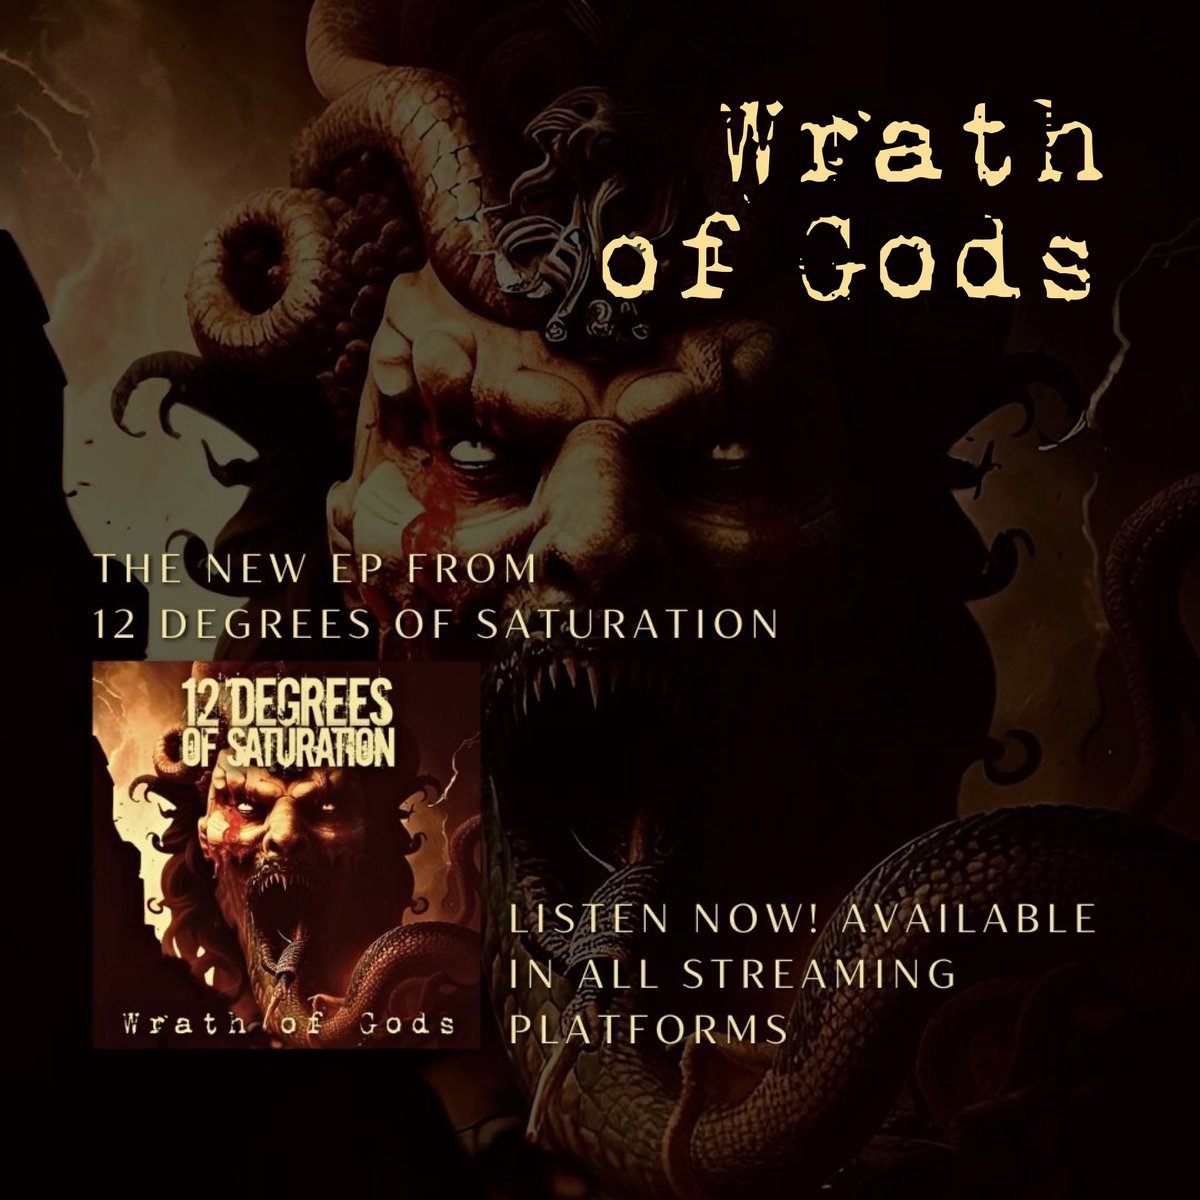 “Wrath of Gods”, the newest EP from 12 Degrees of Saturation.
Listen now in your favorite streaming platform.
#metal #heavymetal #hardrock #rock #instrumentalmetal #instrumentalheavymetal #instrumentalhardrock #instrumentalrock #metalinstrumental